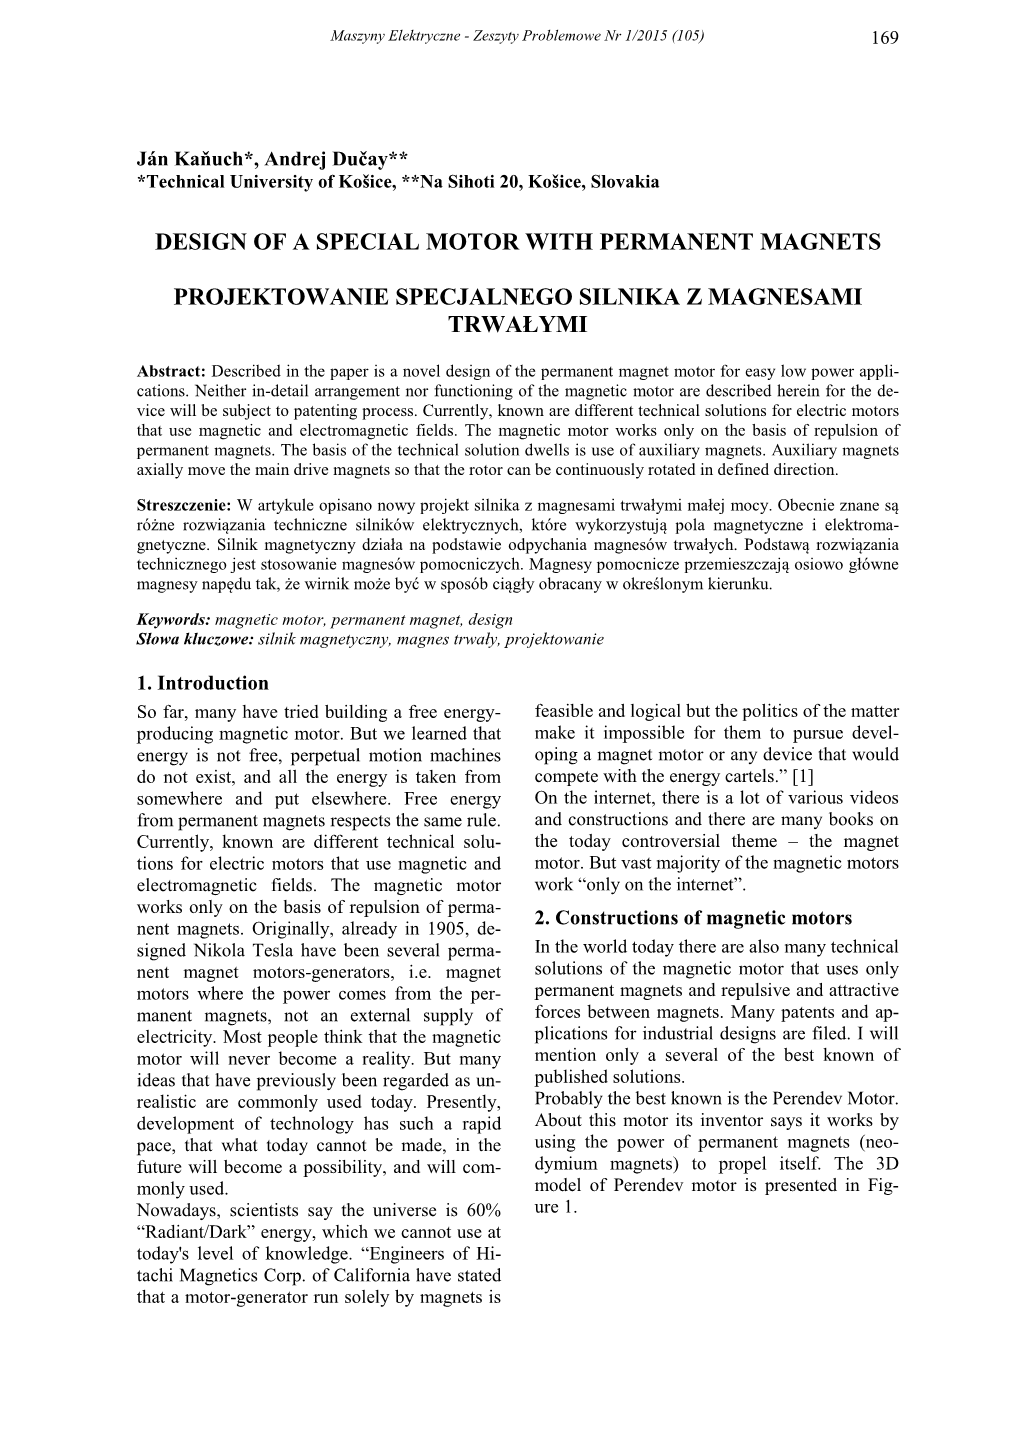 Design of a Special Motor with Permanent Magnets